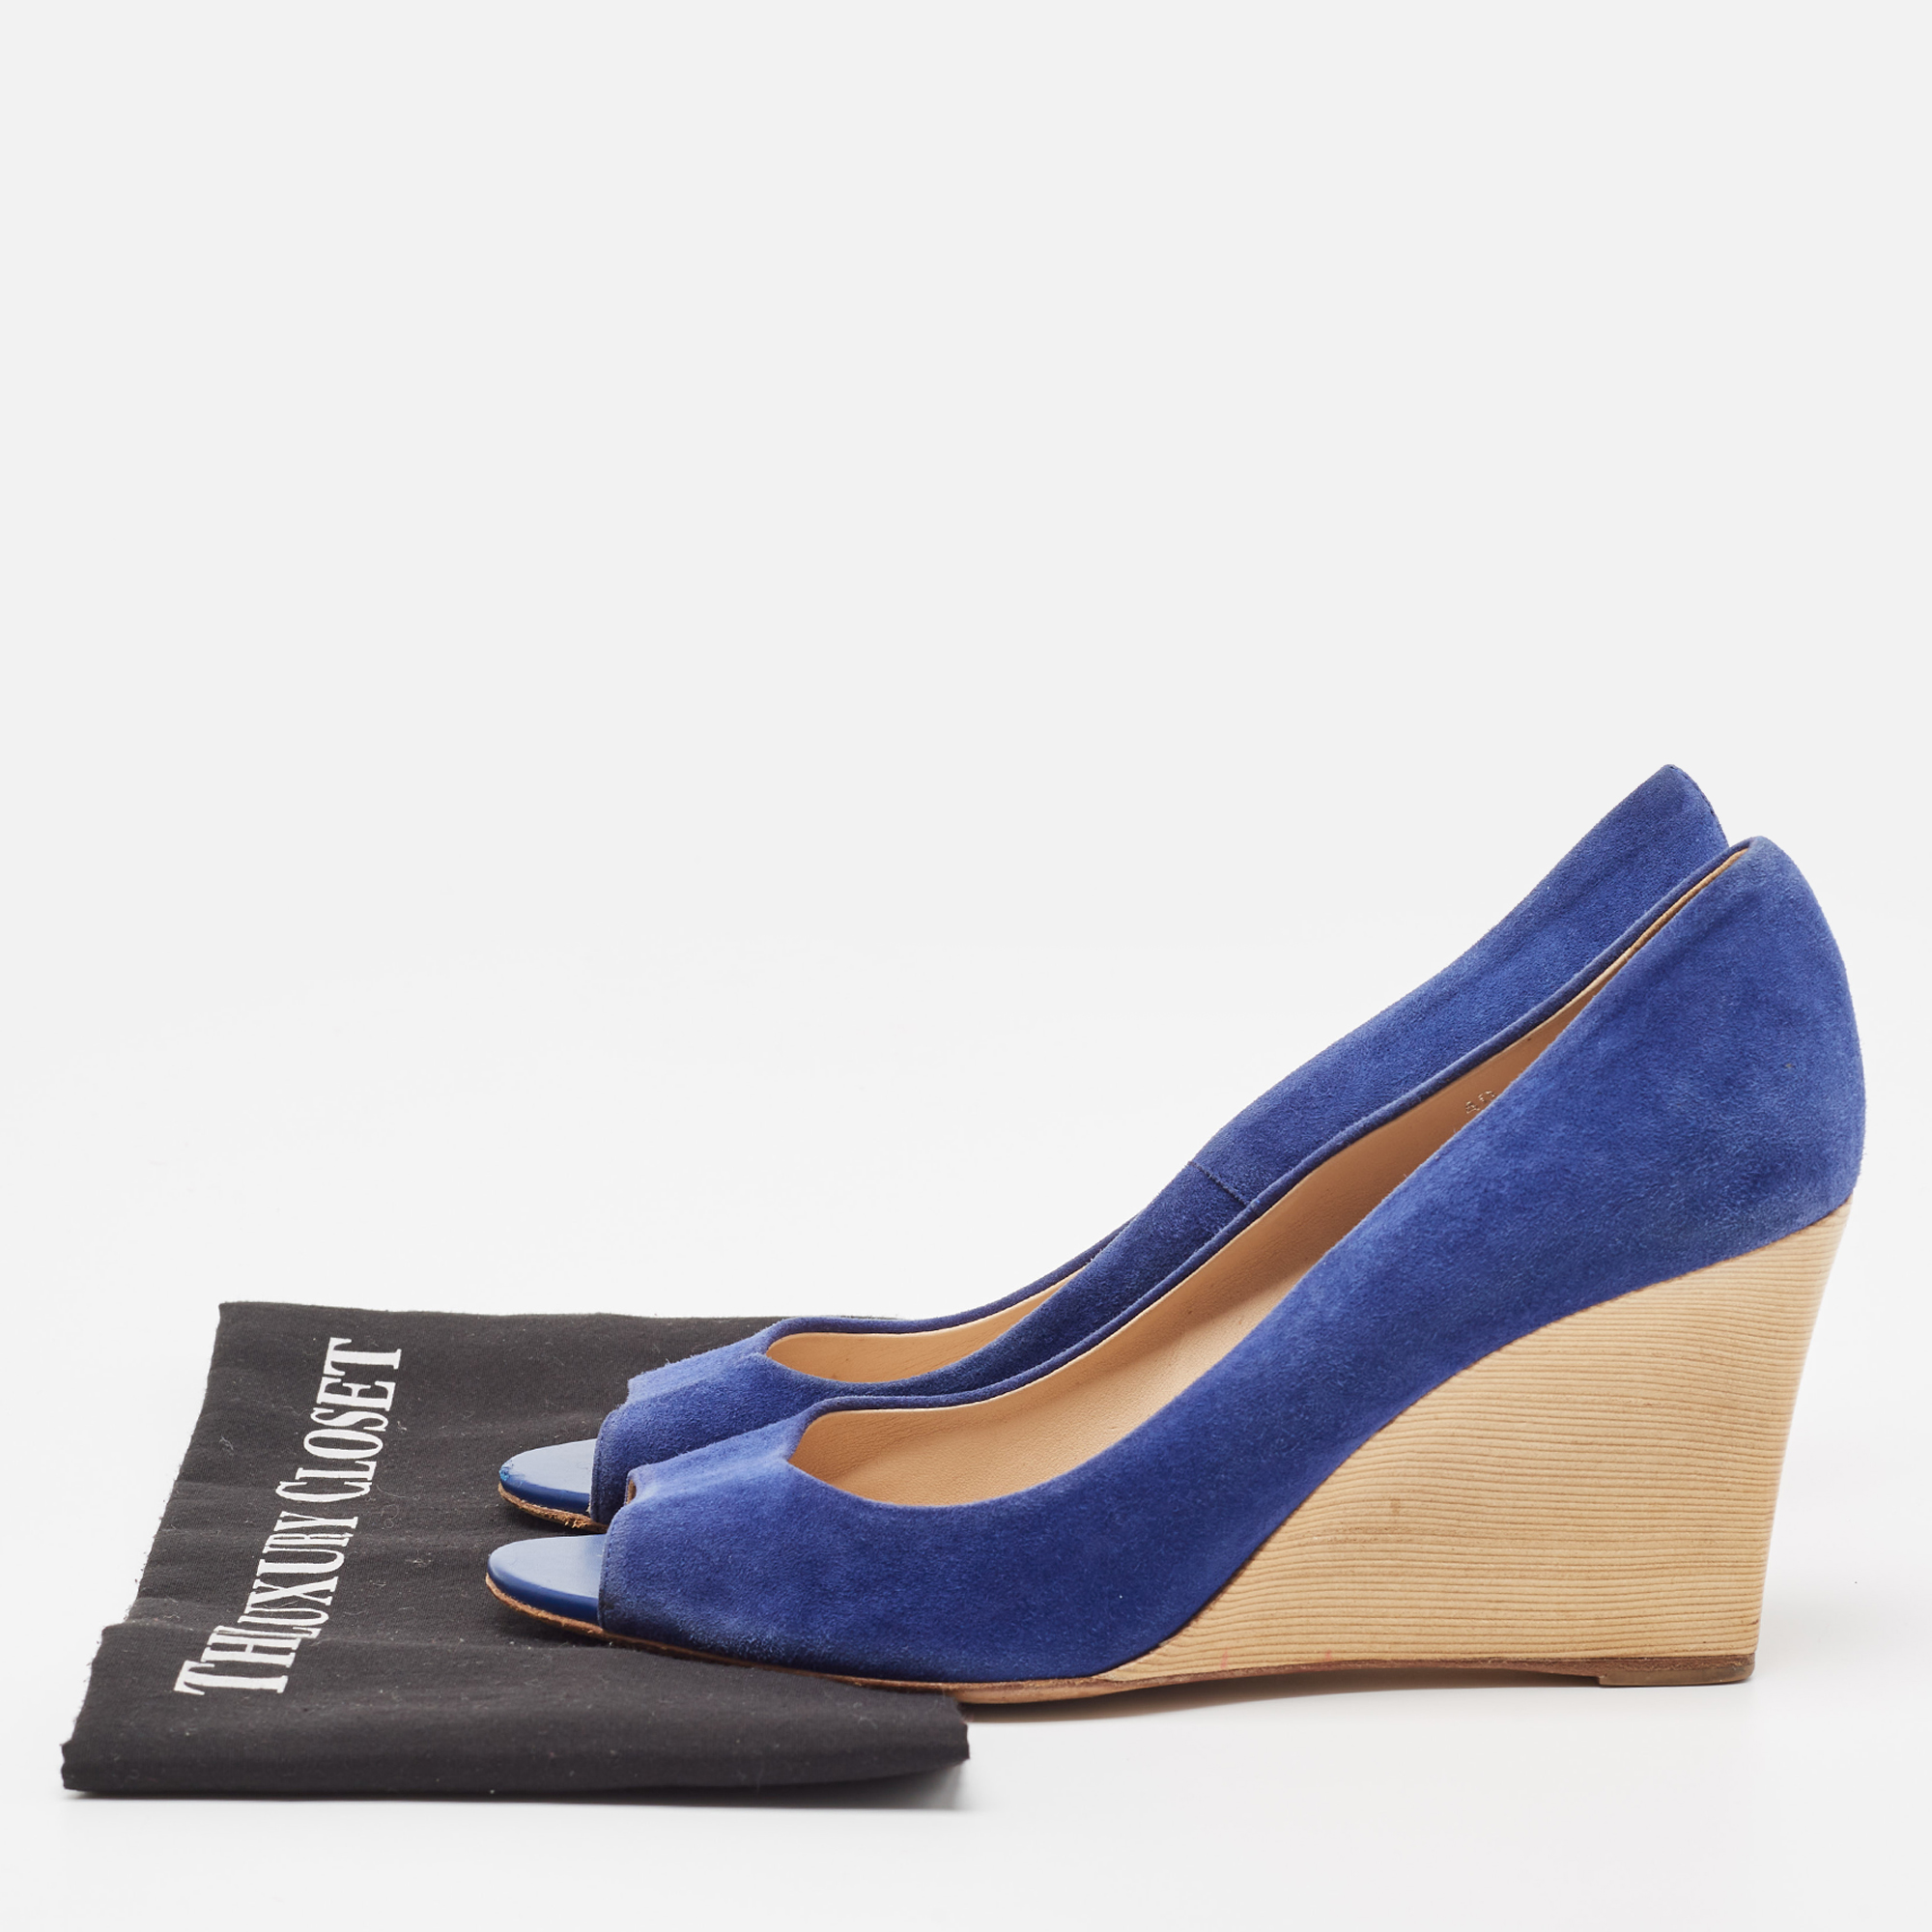 Tod's Blue Suede Wedge Peep Toe Pumps Size 40